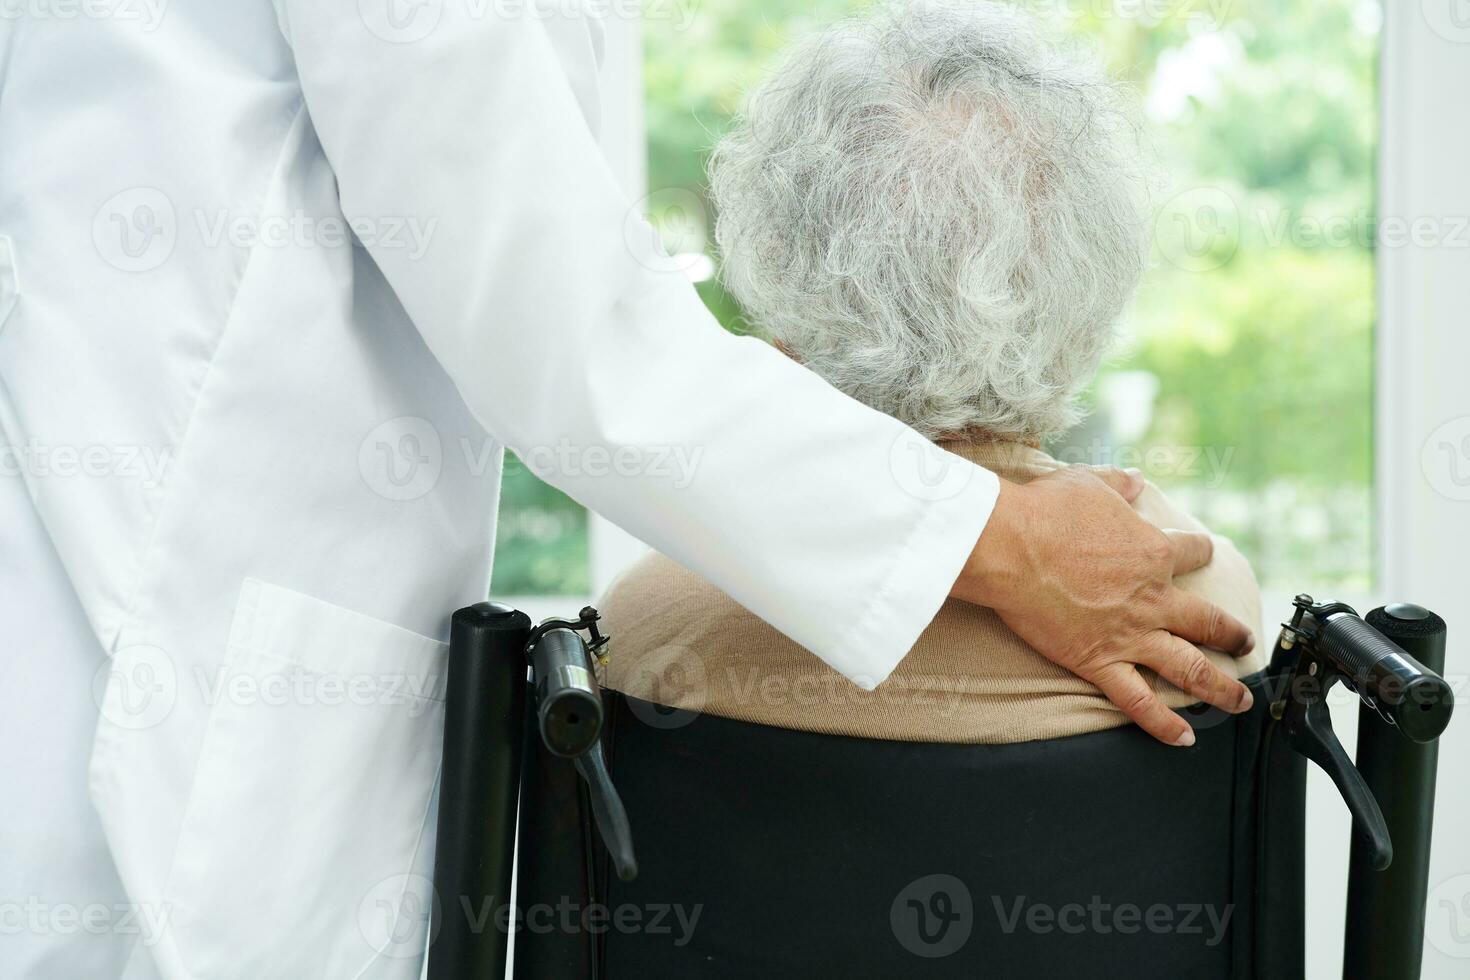 Doctor help Asian elderly woman disability patient sitting on wheelchair in hospital, medical concept. photo